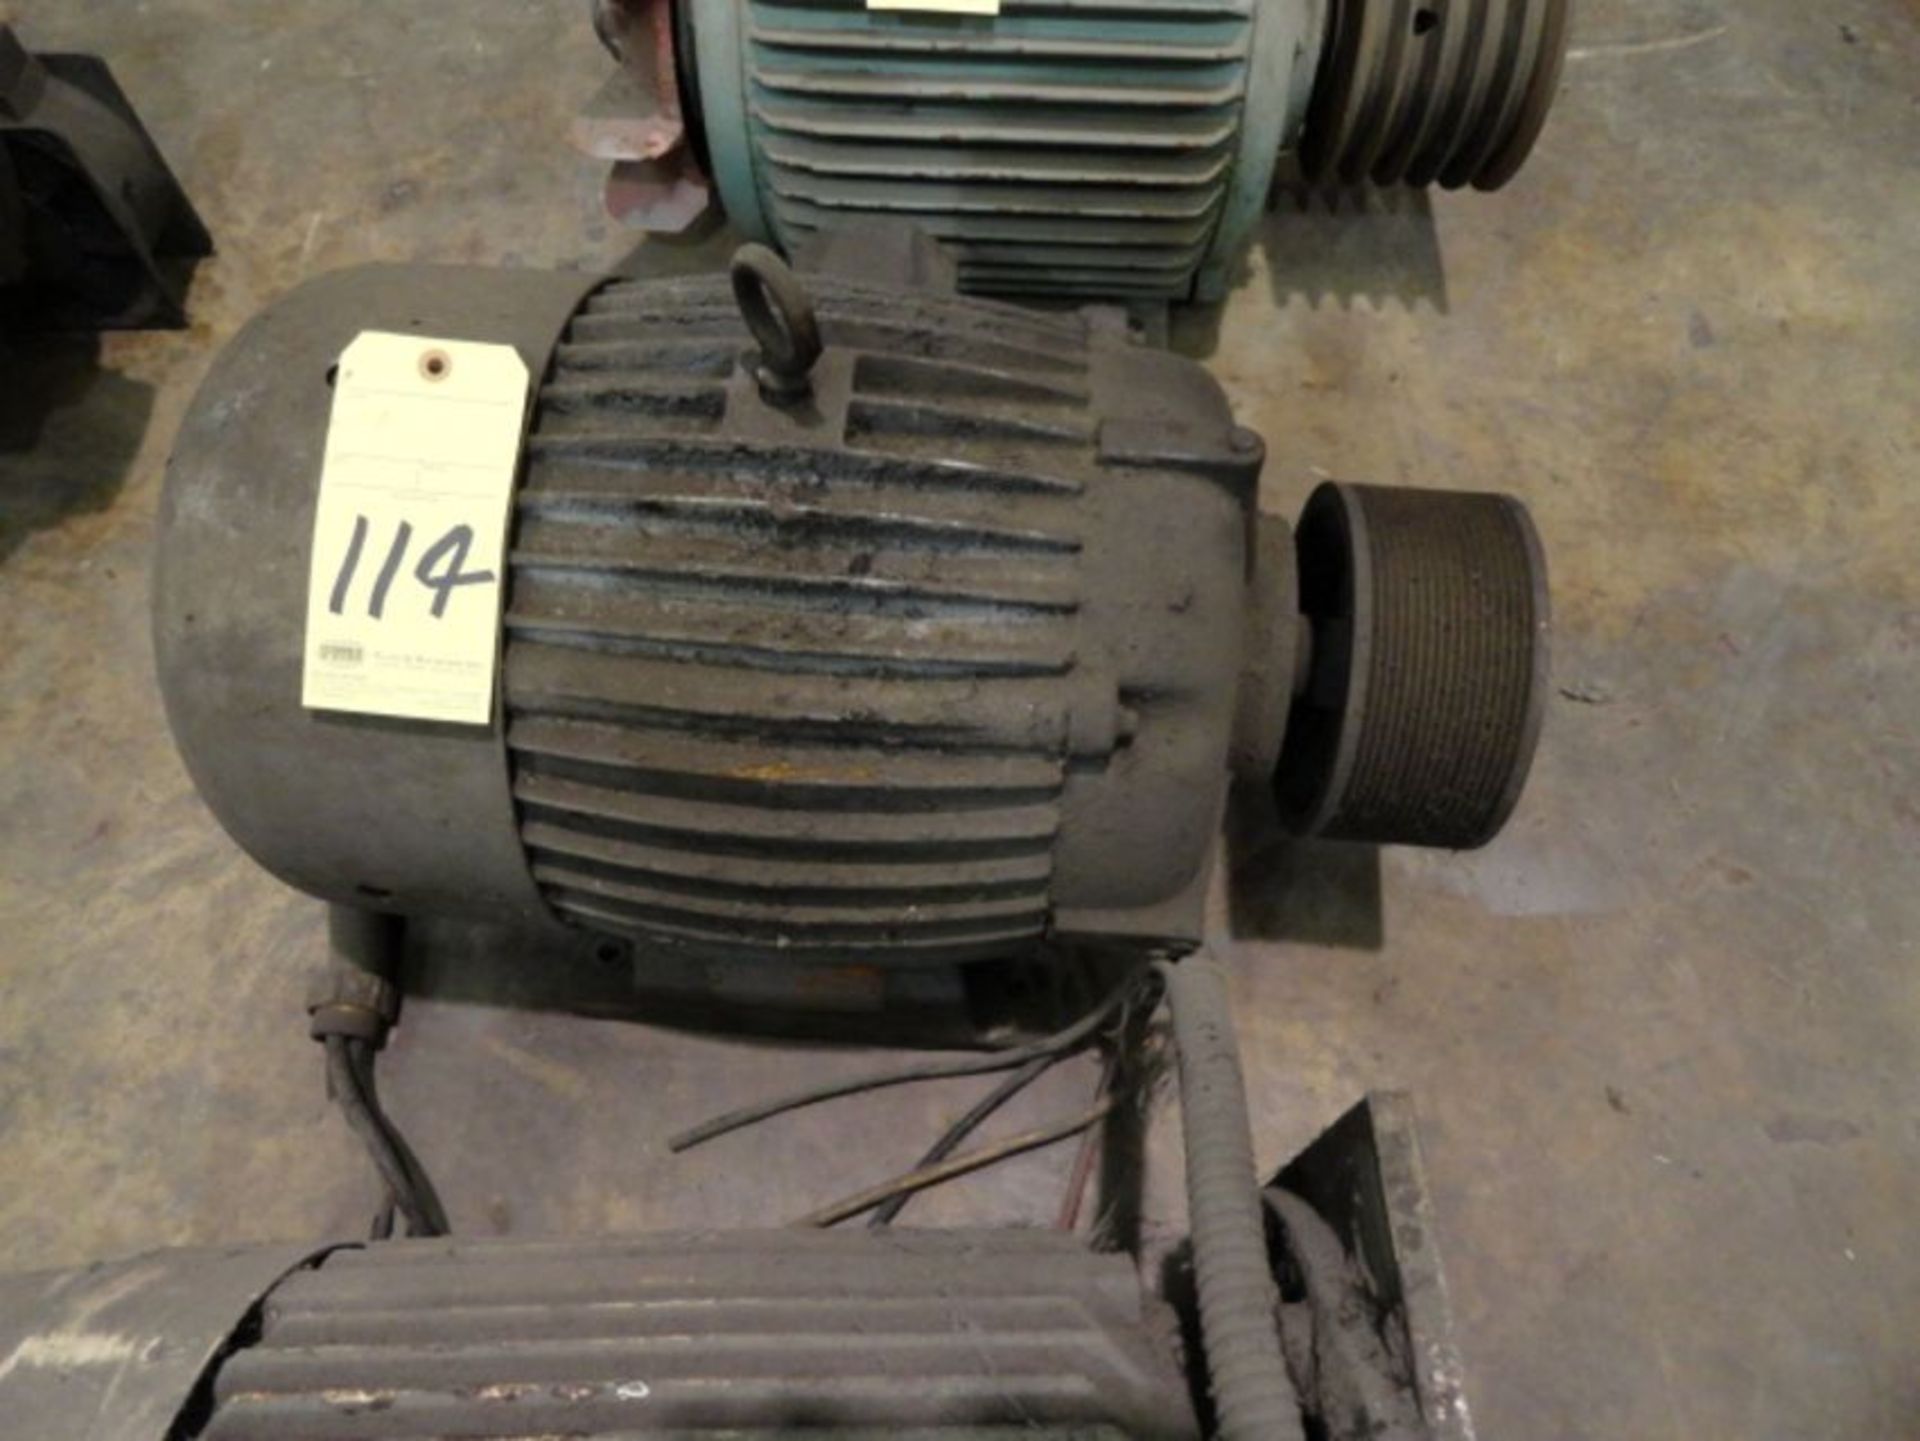 ELECTRIC MOTOR, GENERAL ELECTRIC, 25 HP, 230/460 v., 1,765 RPM - Image 2 of 2